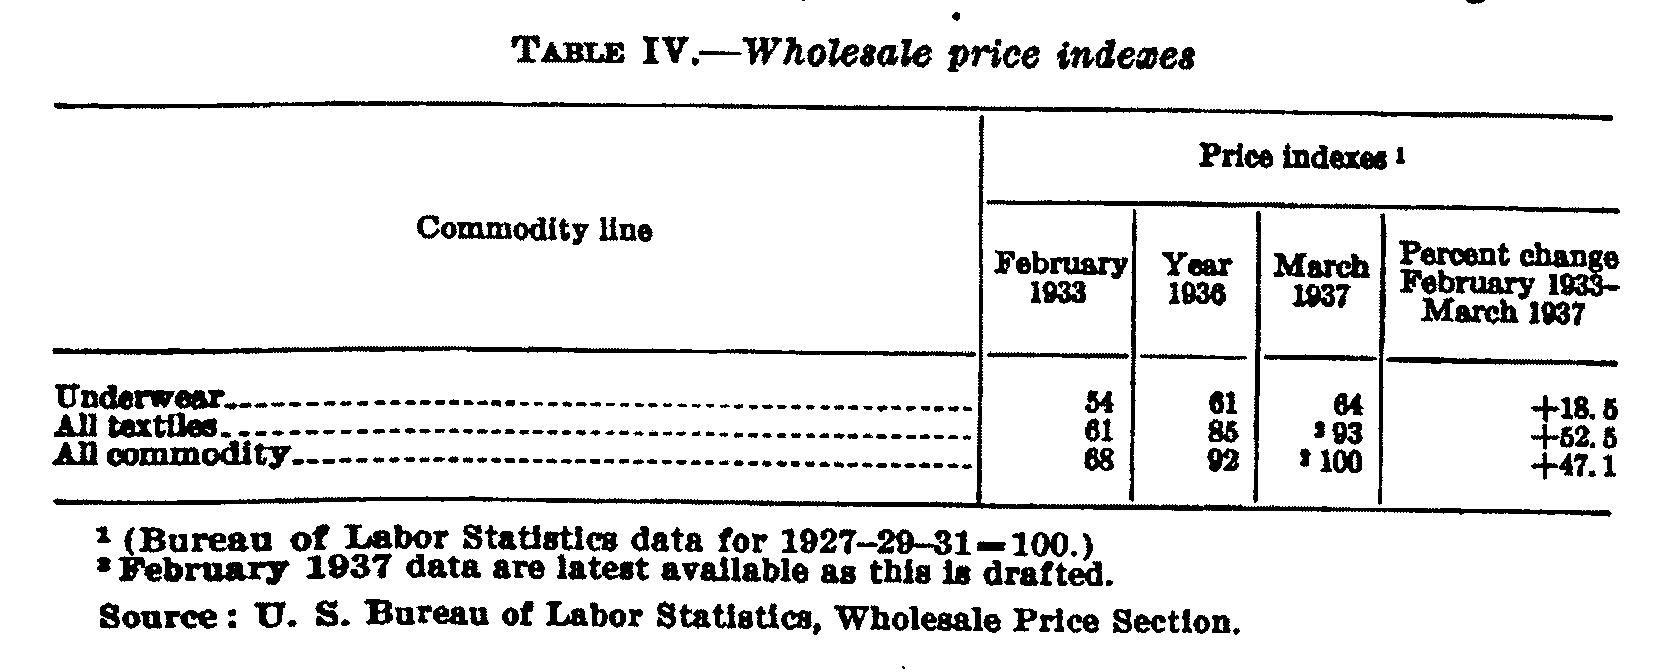 Table IV - Wholesale price indexs